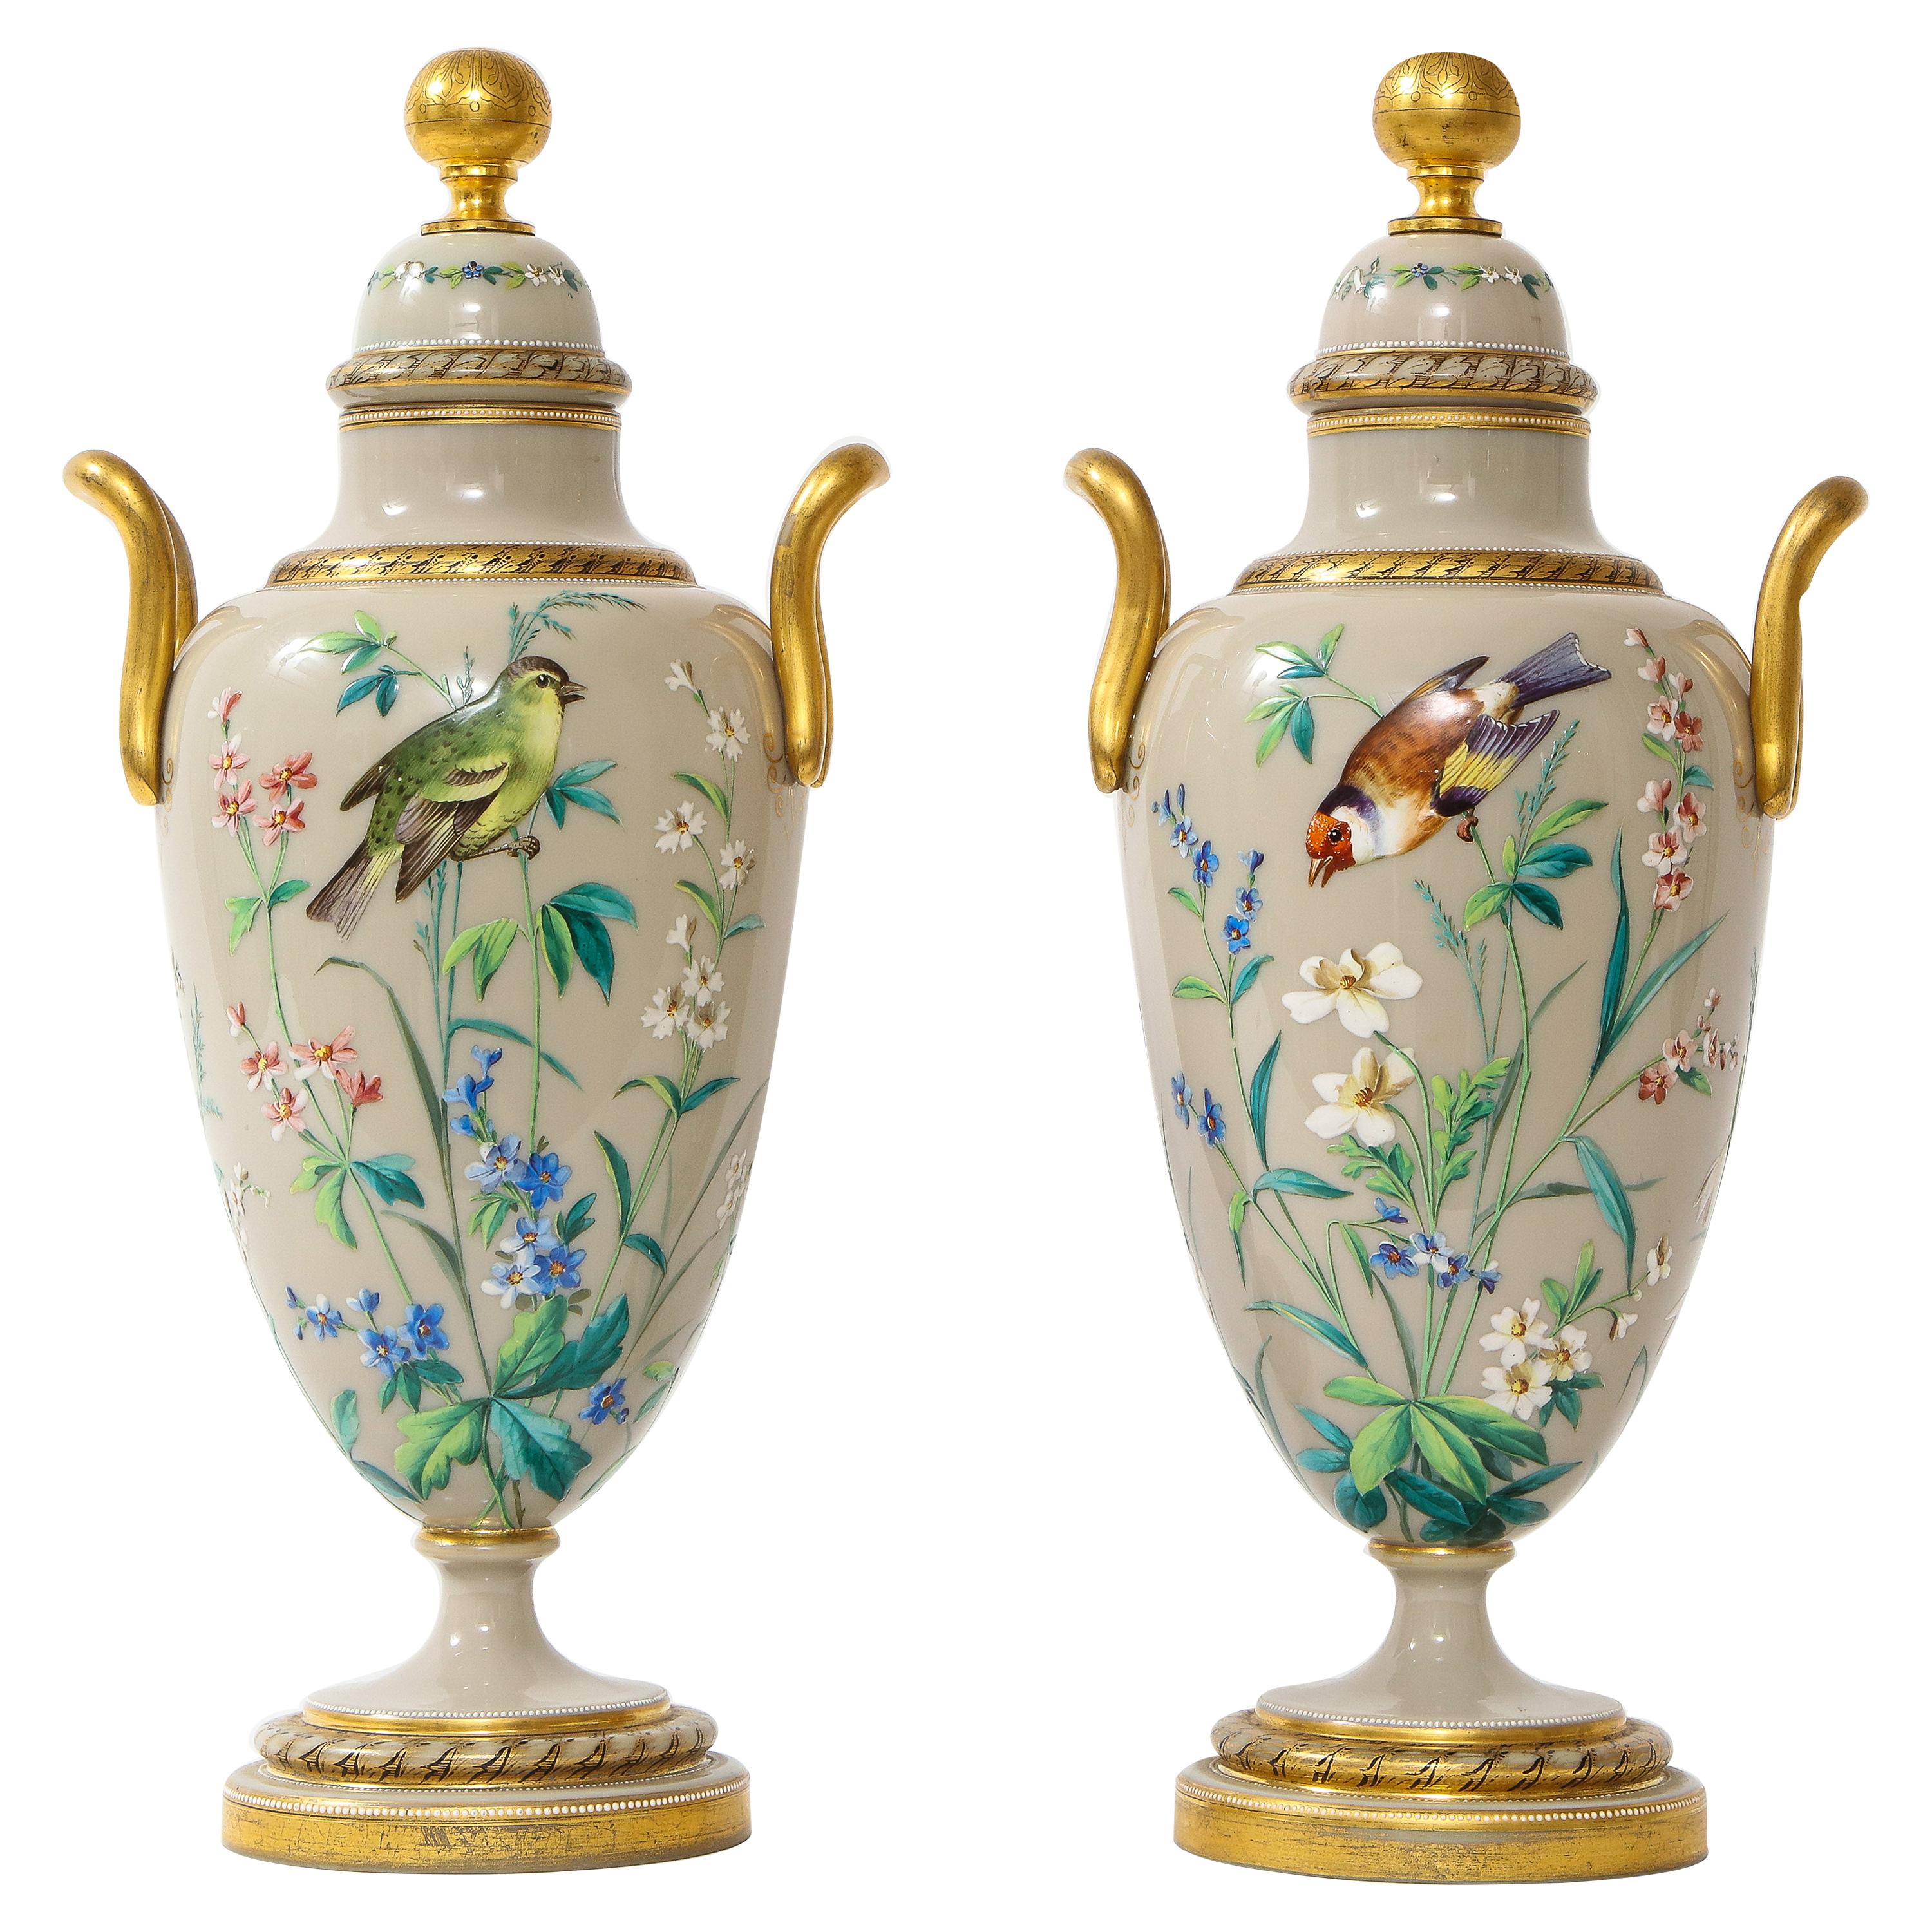 Pair of 19th C. French Baccarat Grey Opalescent Ground Hand-Enameled Vases